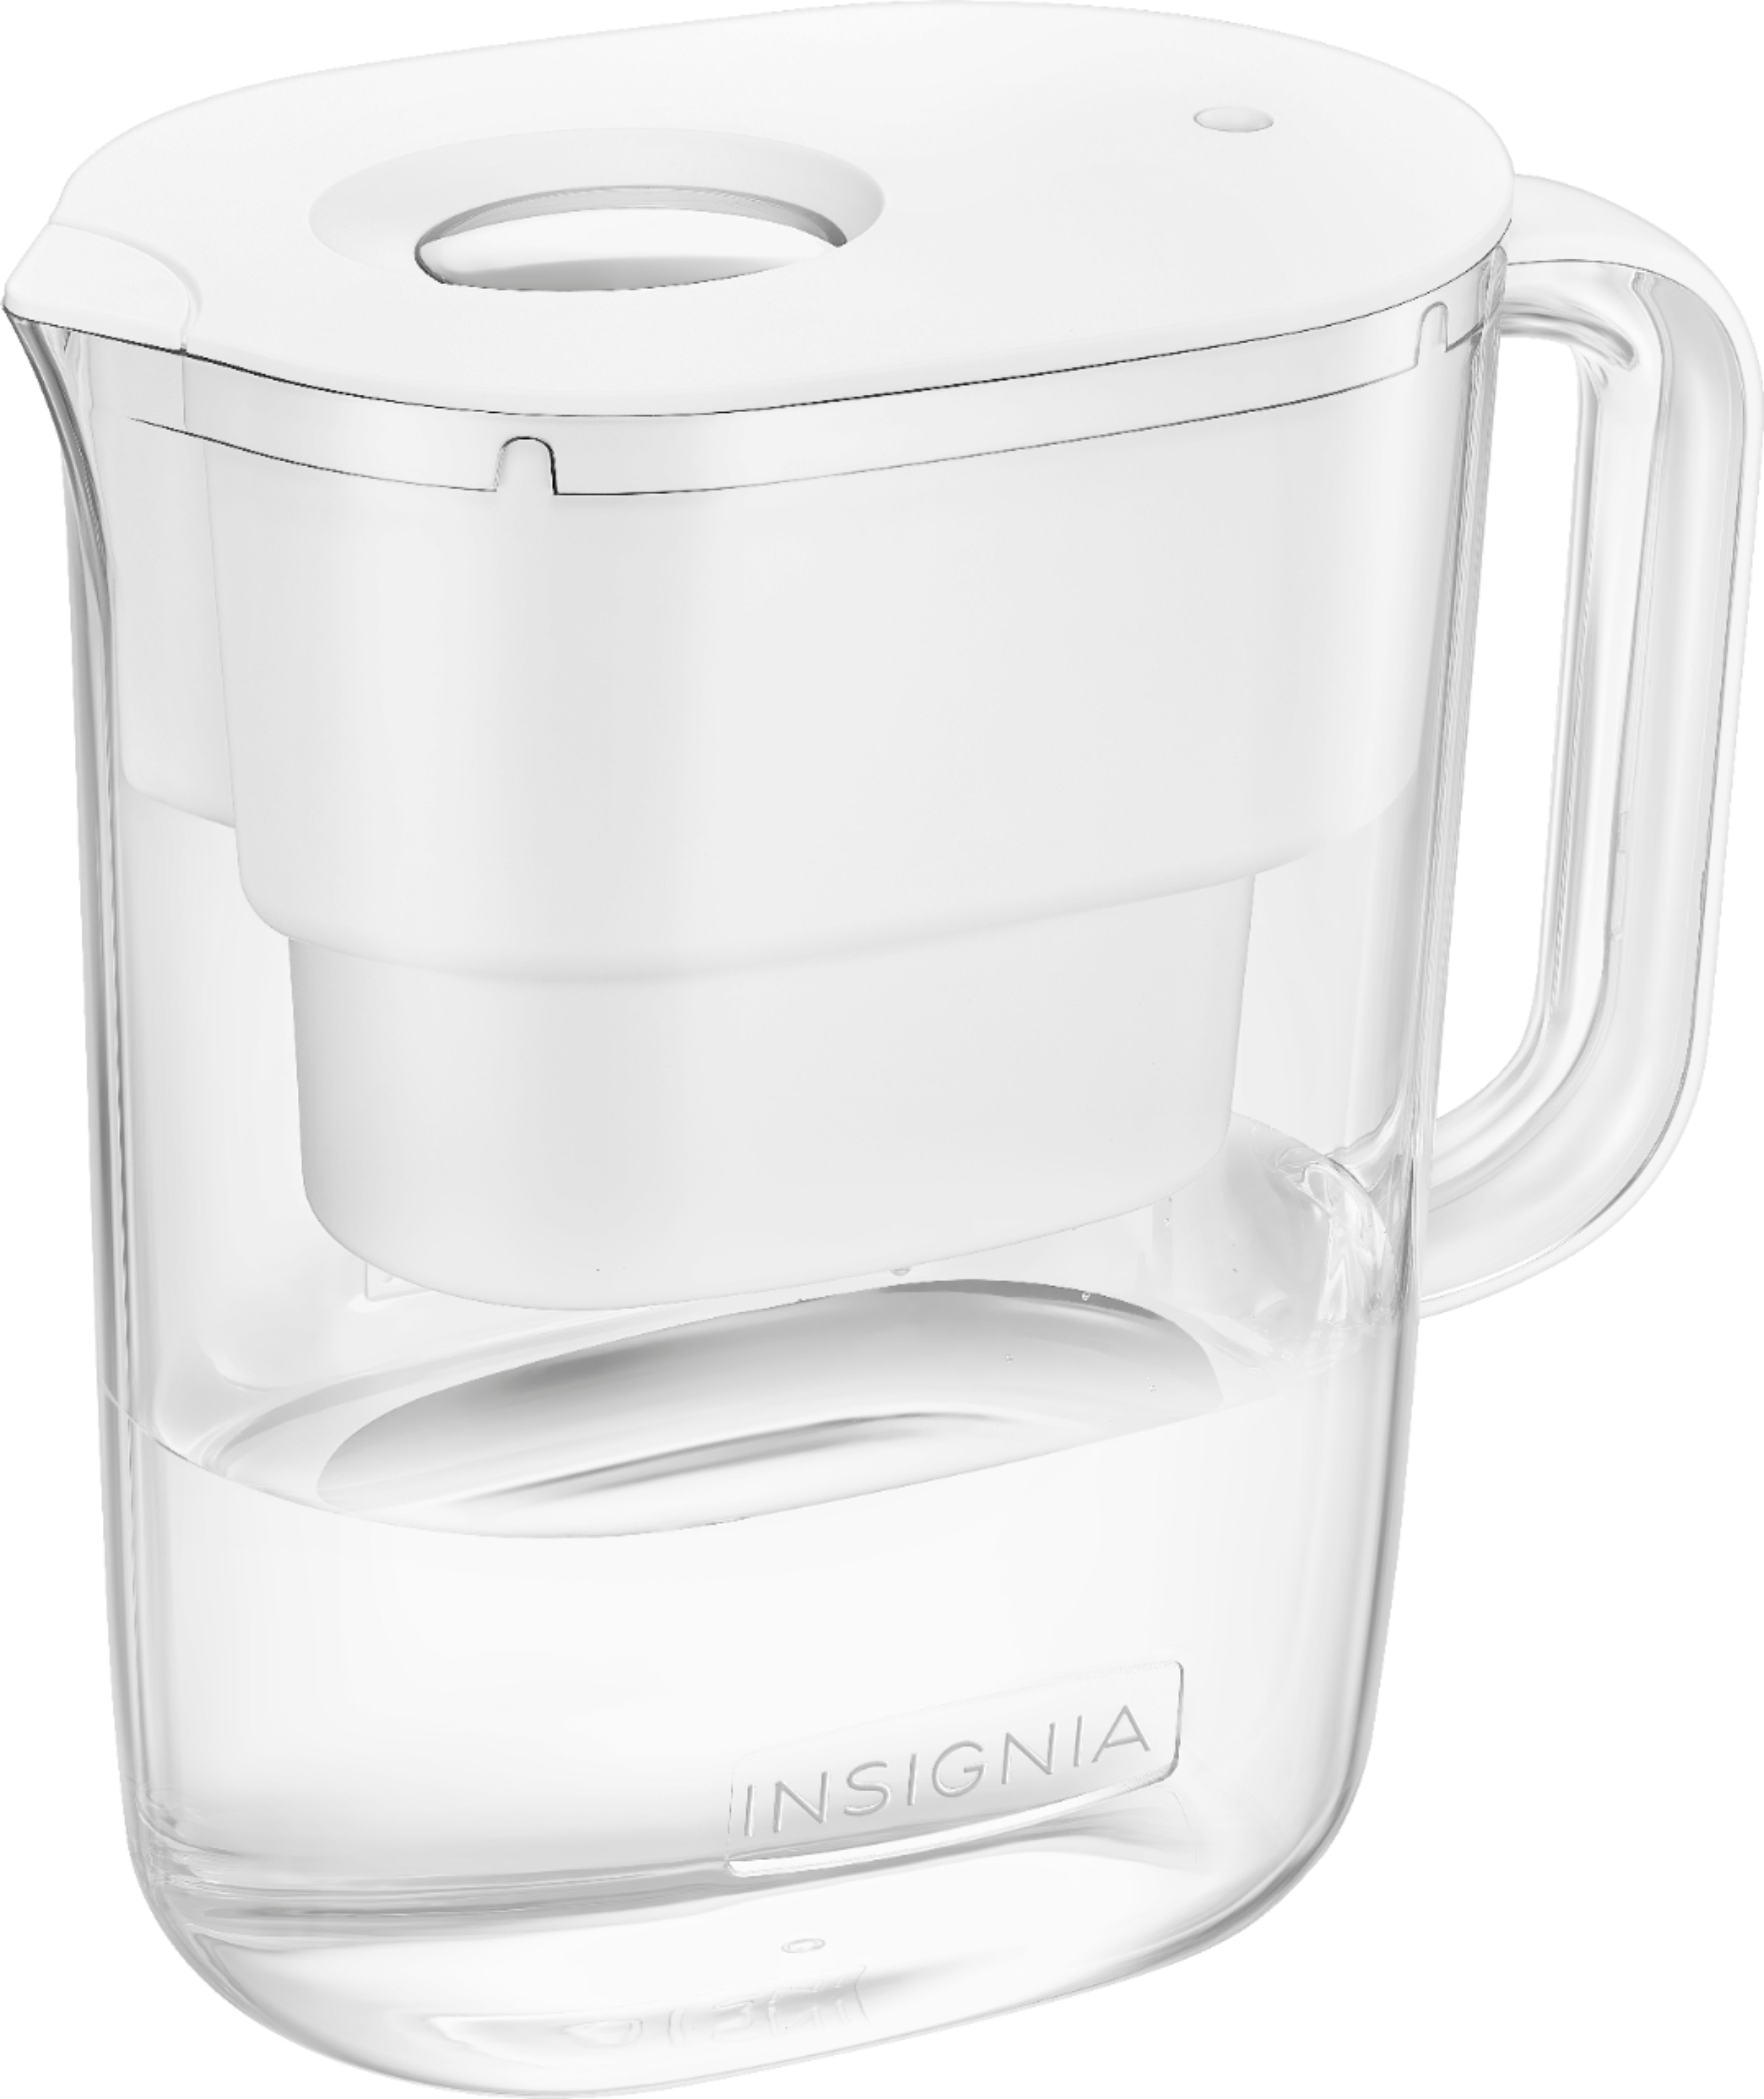  Brita Large Water Filter Pitcher for Tap and Drinking Water + 1  Standard Filter, Lasts 2 Months, 10-Cup Capacity, White